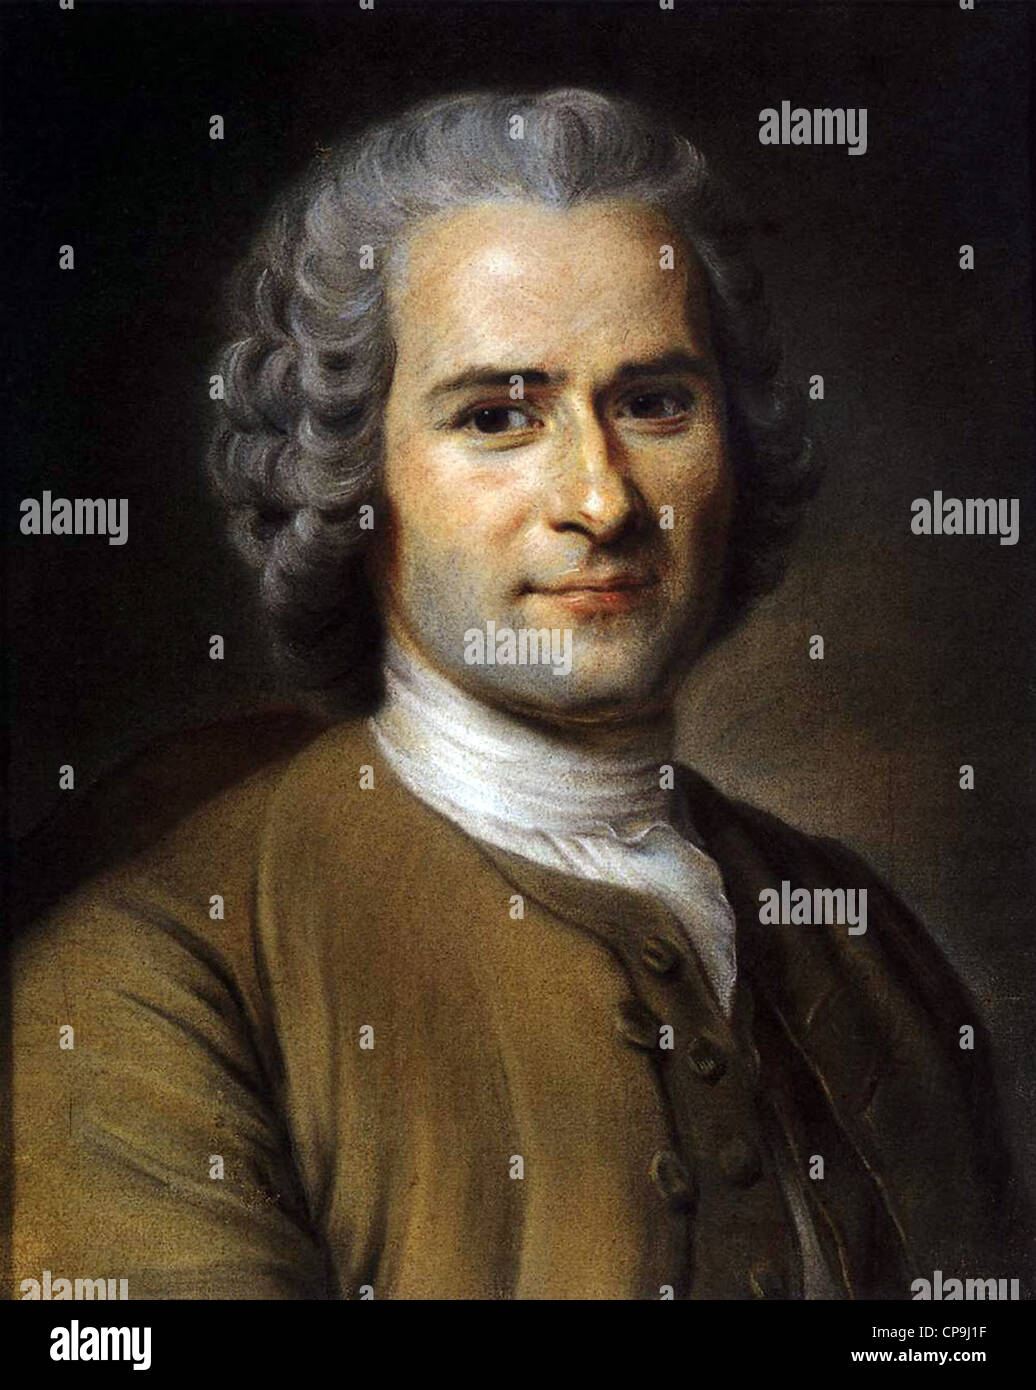 Jean-Jacques Rousseau, Genevan philosopher, author and composer Stock Photo